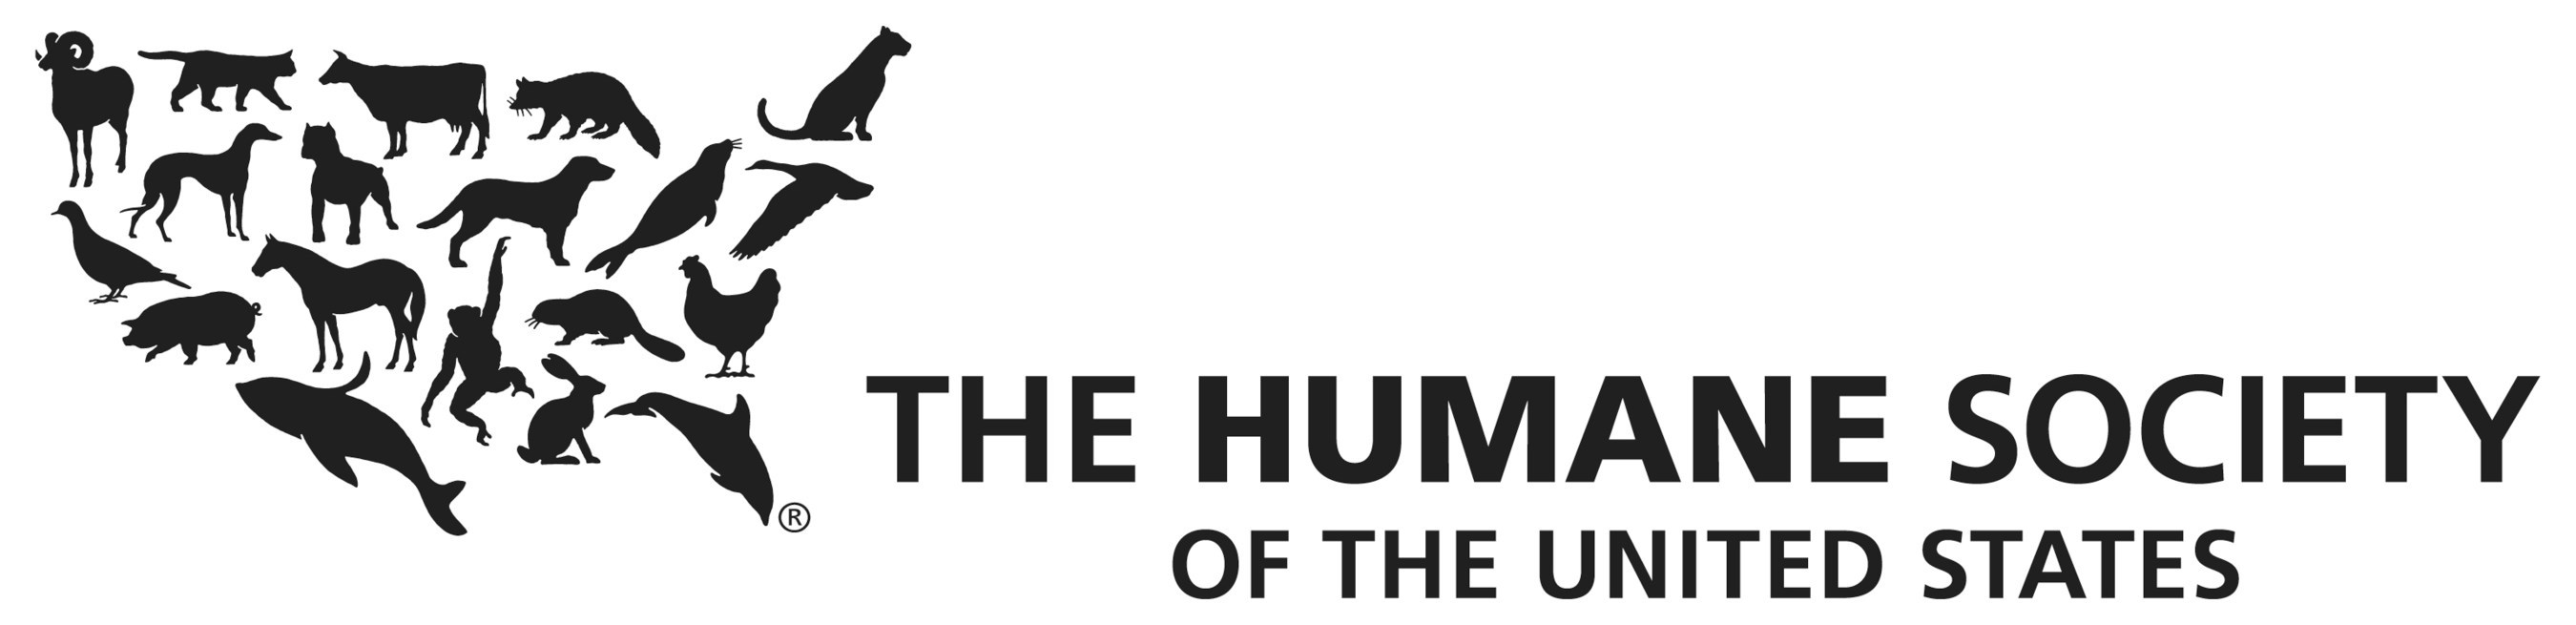 Humane Society of the United States. "The Humane Society of Canada"+Tracy. Humane шрифт. Greenville Humane Society план. Human society